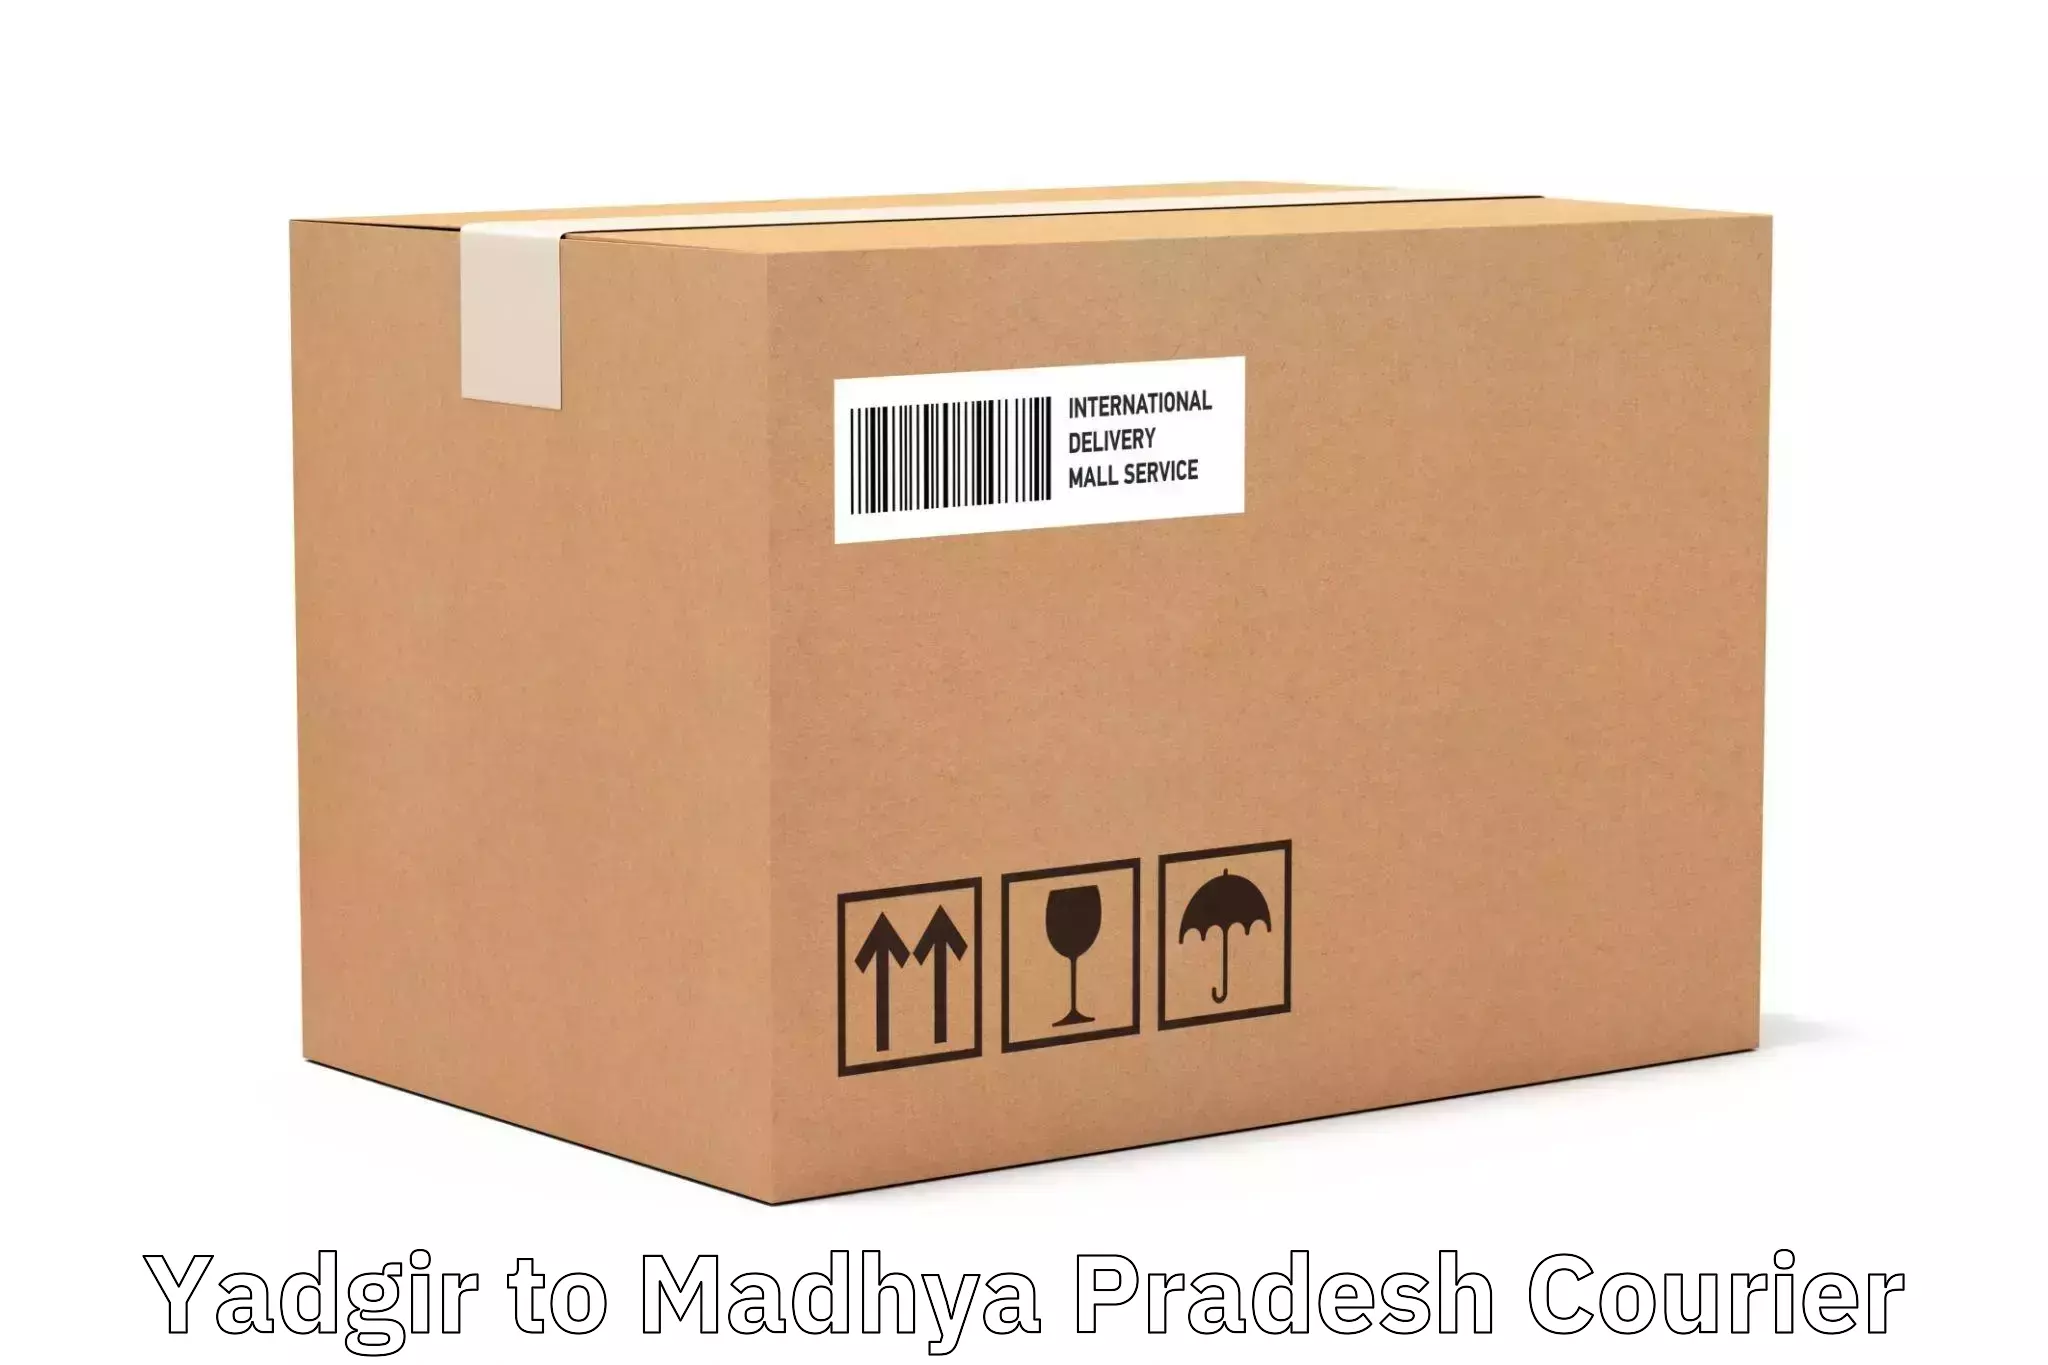 Global delivery options in Yadgir to Manawar